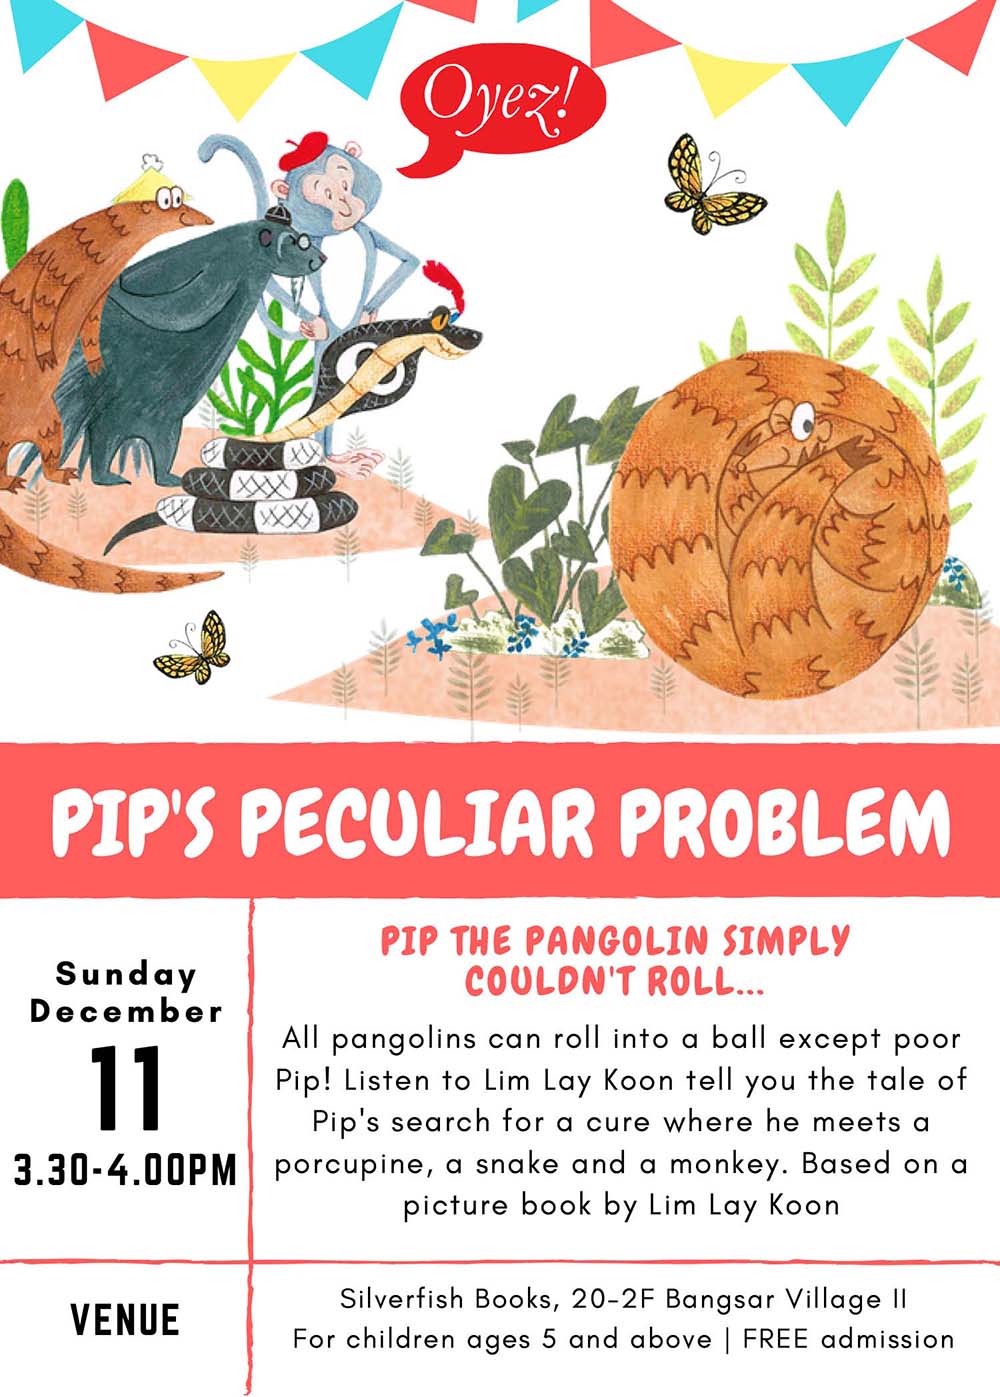 Pip's Peculiar Problem - storytime based on children's picture book by Lim Lay Koon, published by Oyez!Books